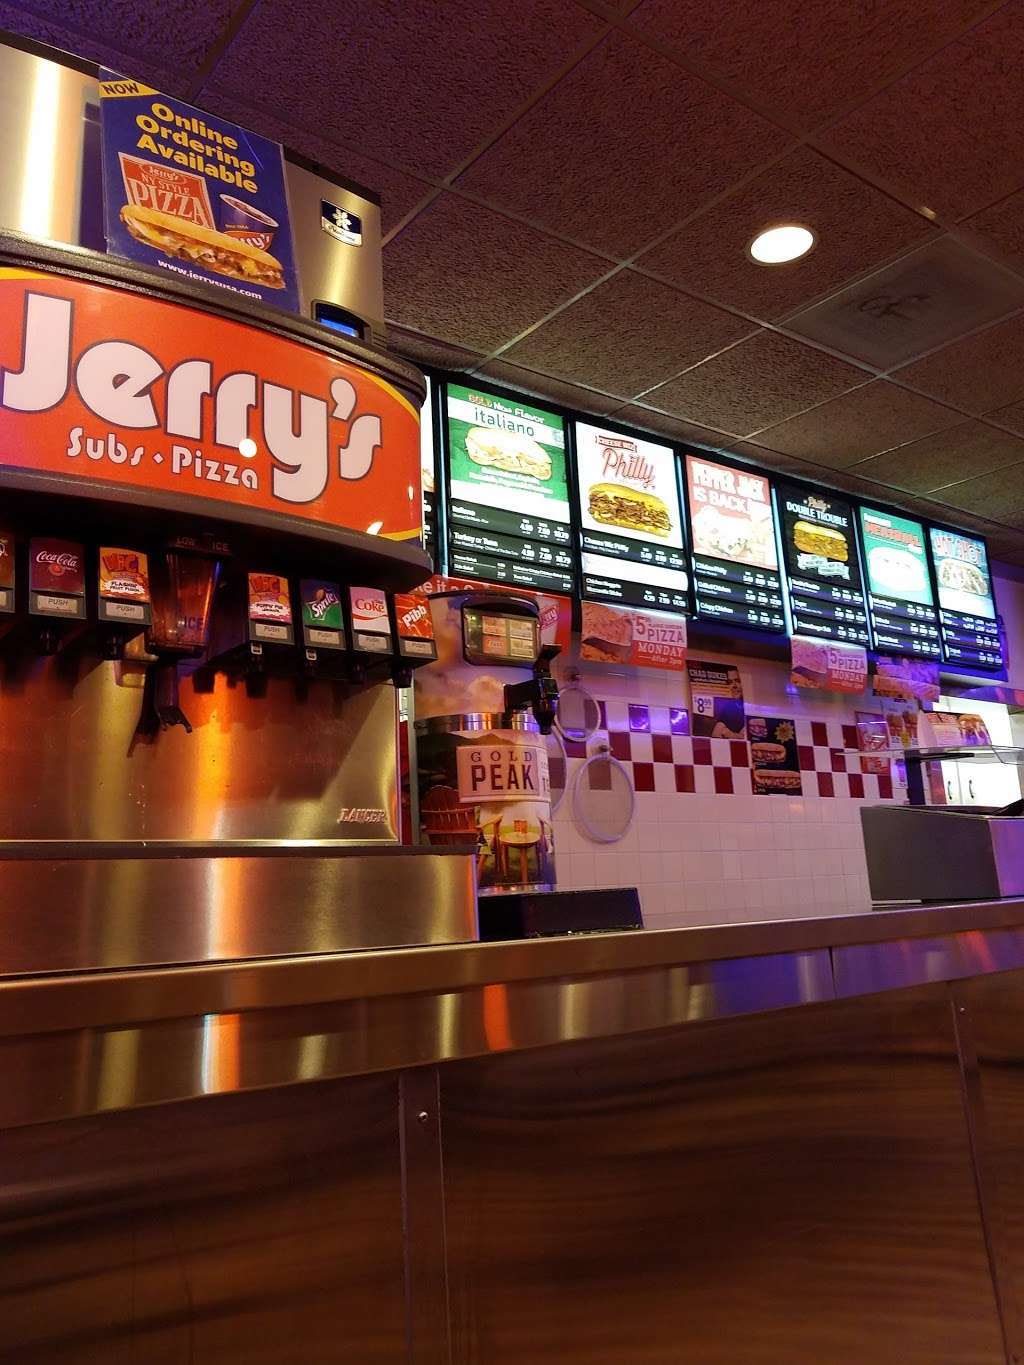 Jerrys Subs and Pizza | 13962 Solomons Island Rd S, Solomons, MD 20688 | Phone: (410) 326-4820